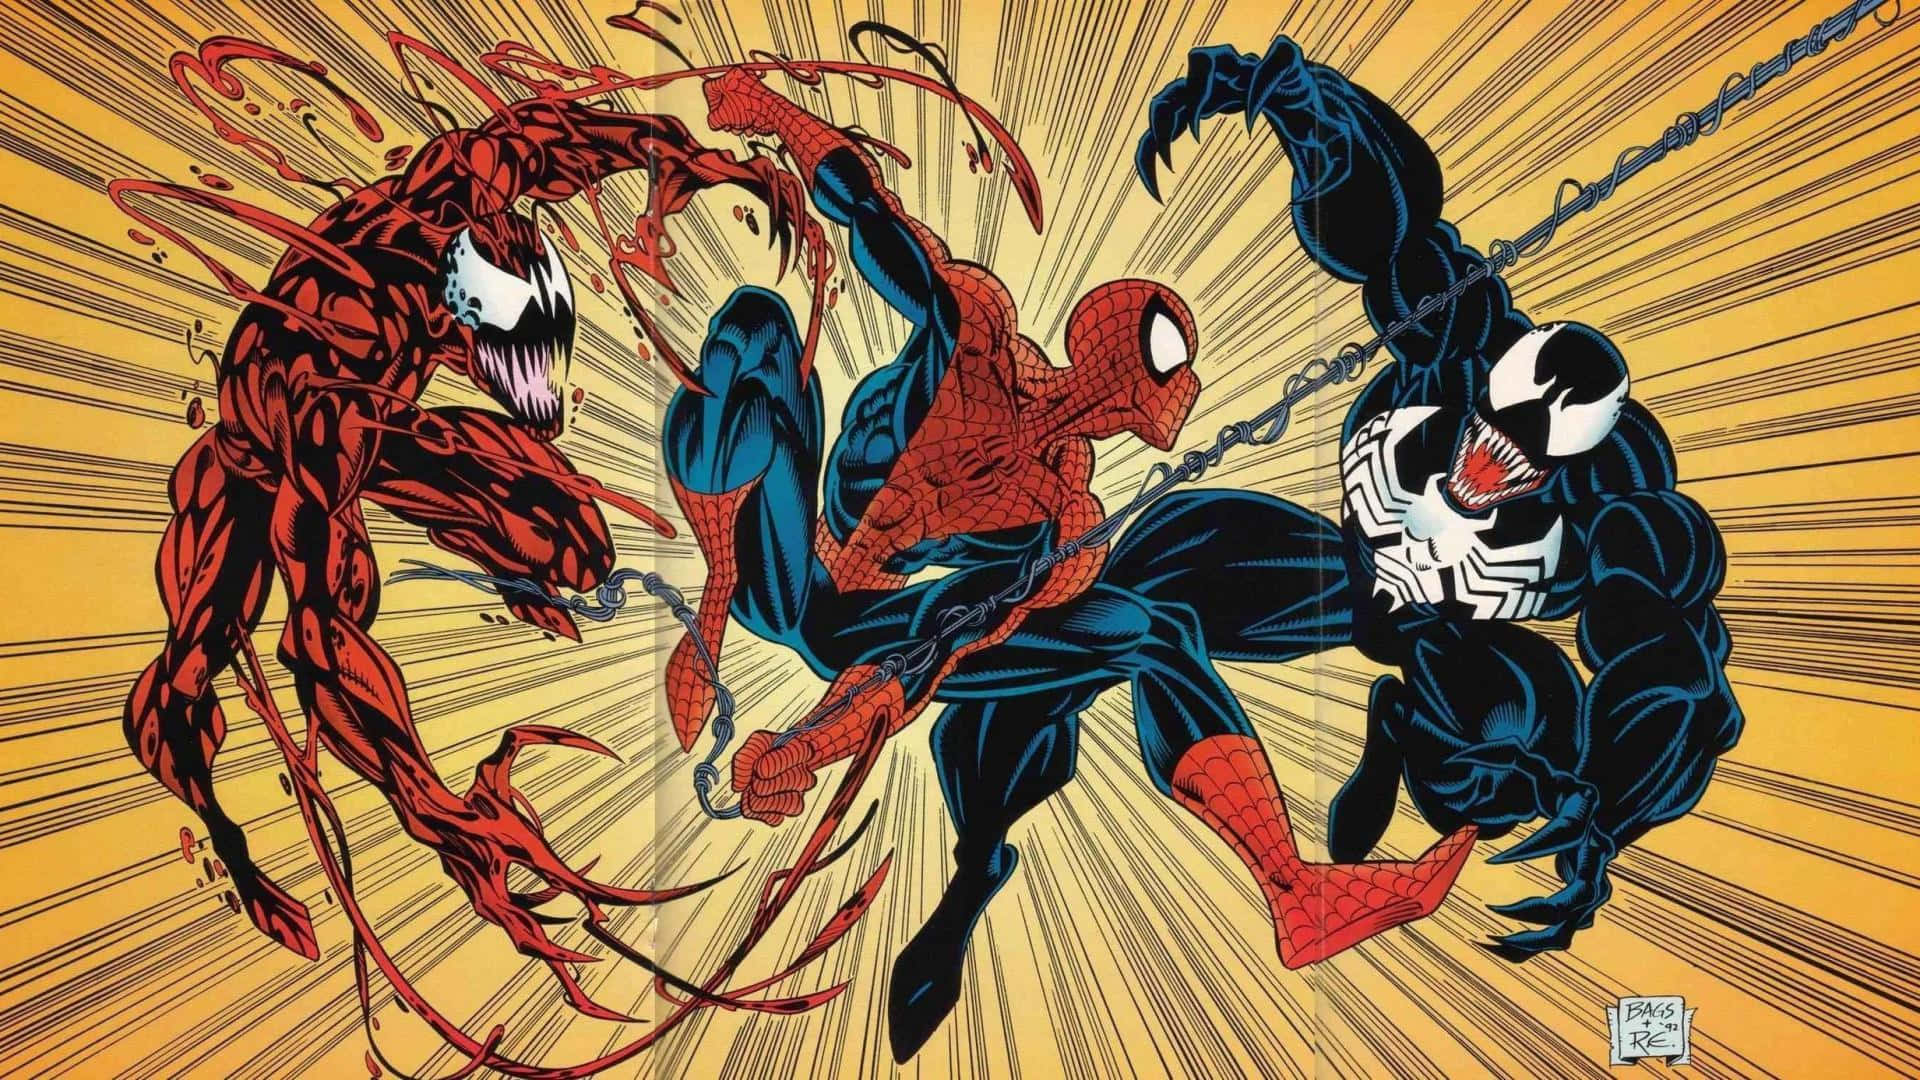 Spider - Man And Venom Fighting In The Comics Wallpaper